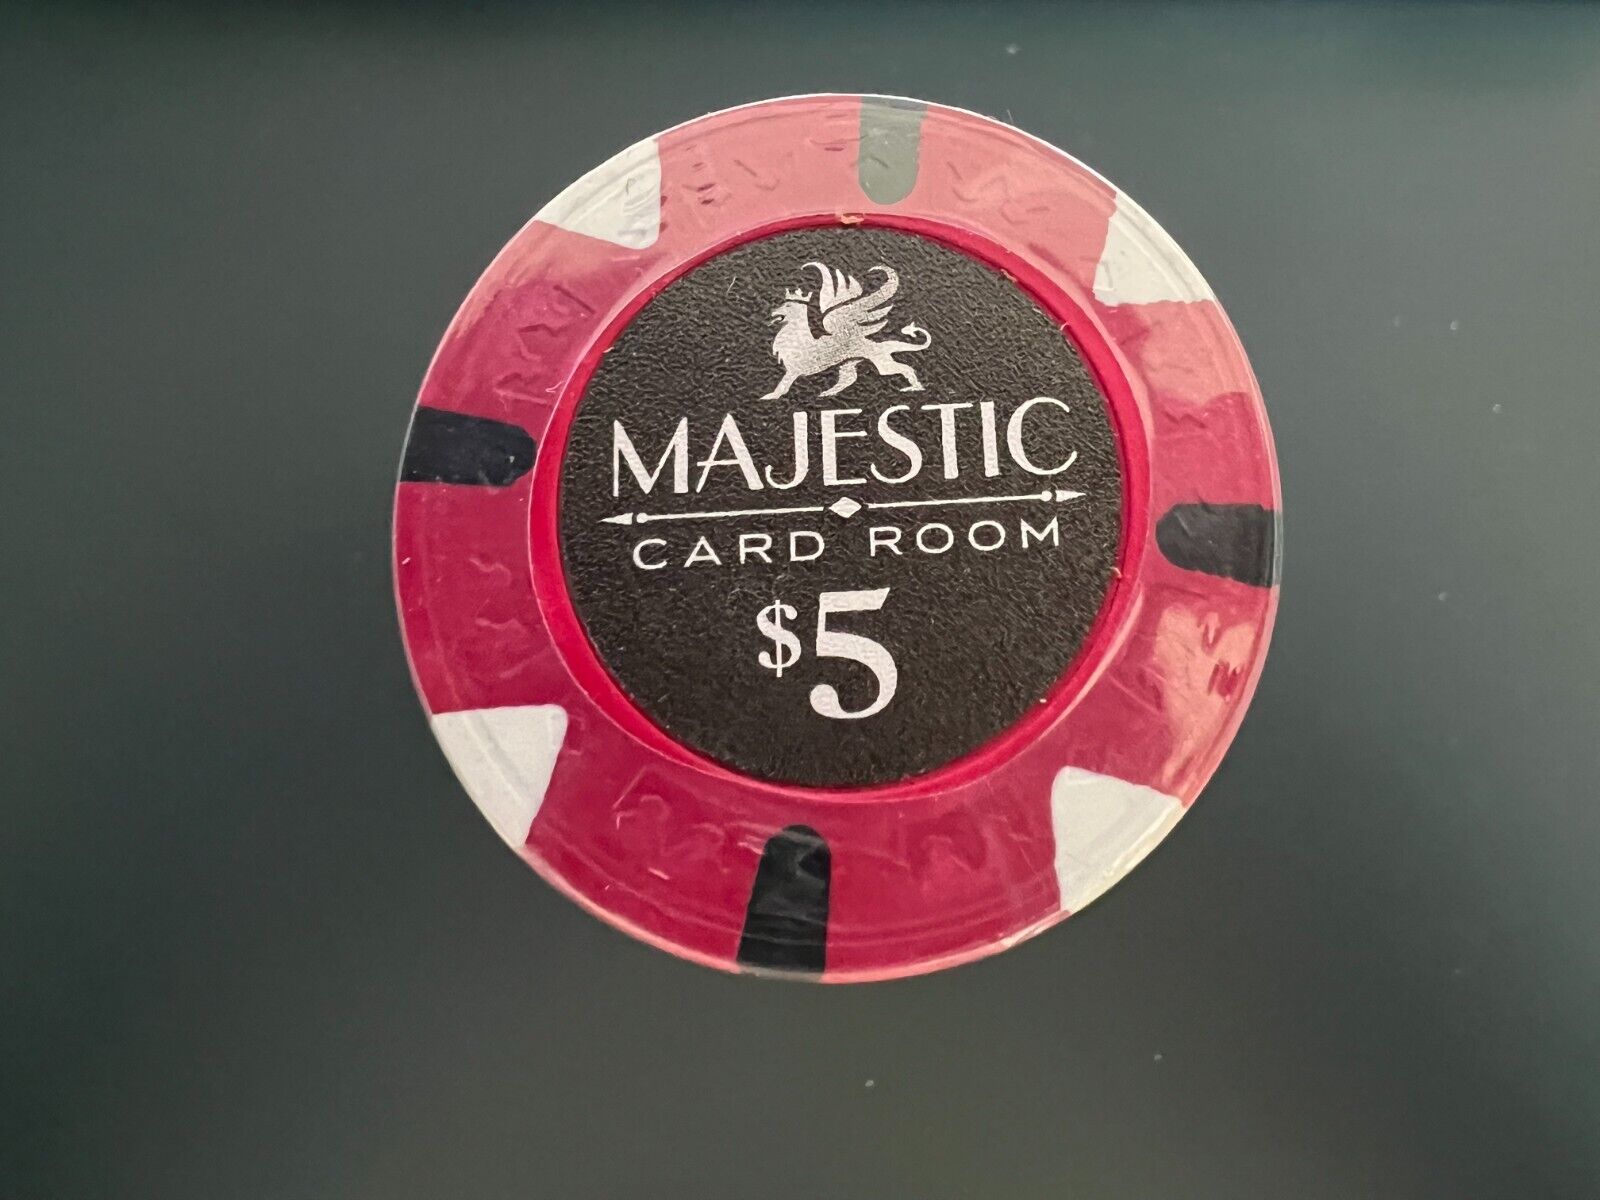 Majestic Card Room $5 clay poker chips 9.6g  - 25 per pack